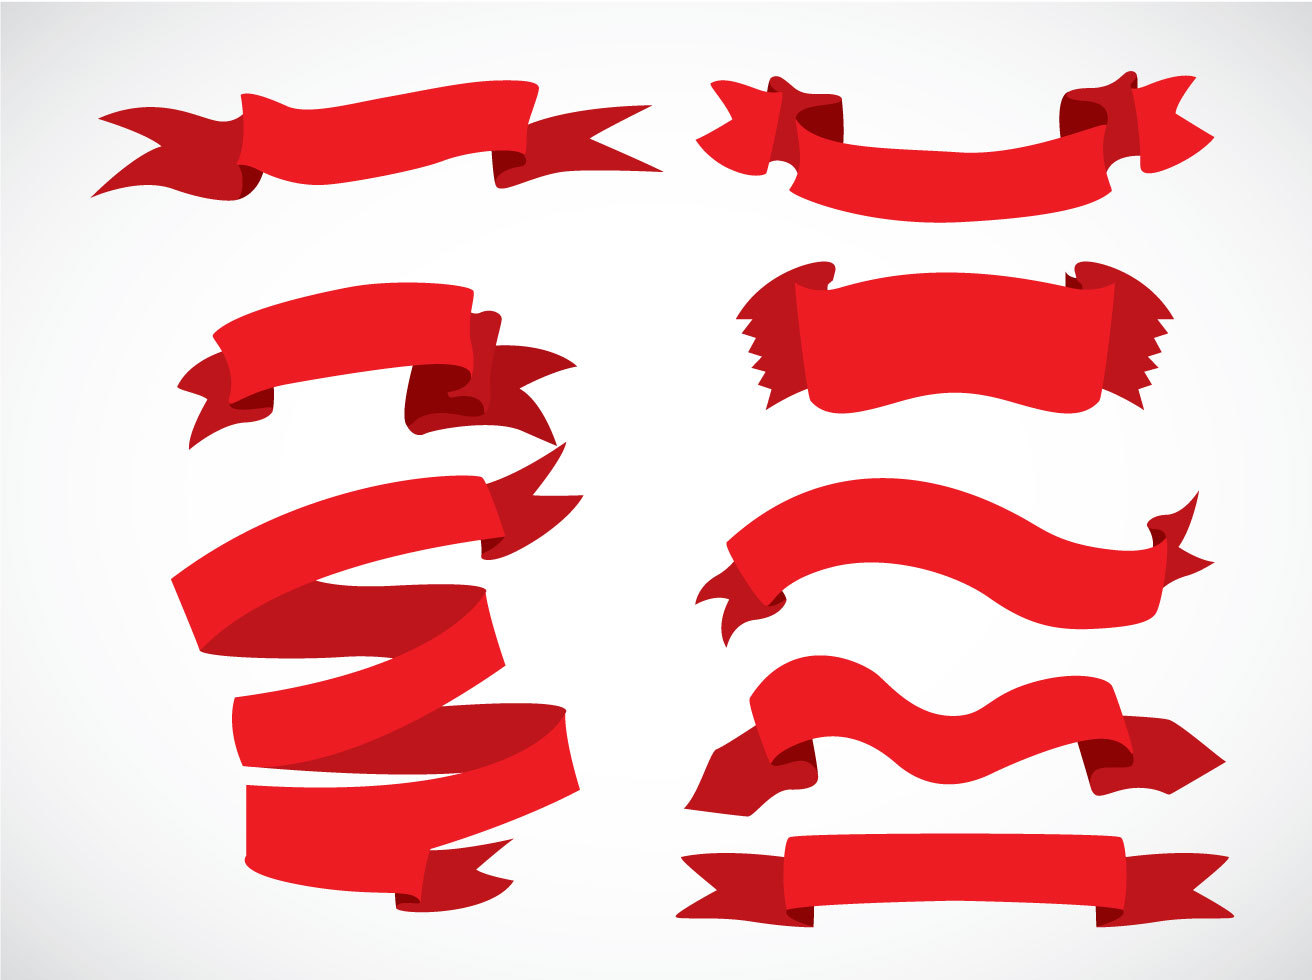 Red Ribbons Vector Sets